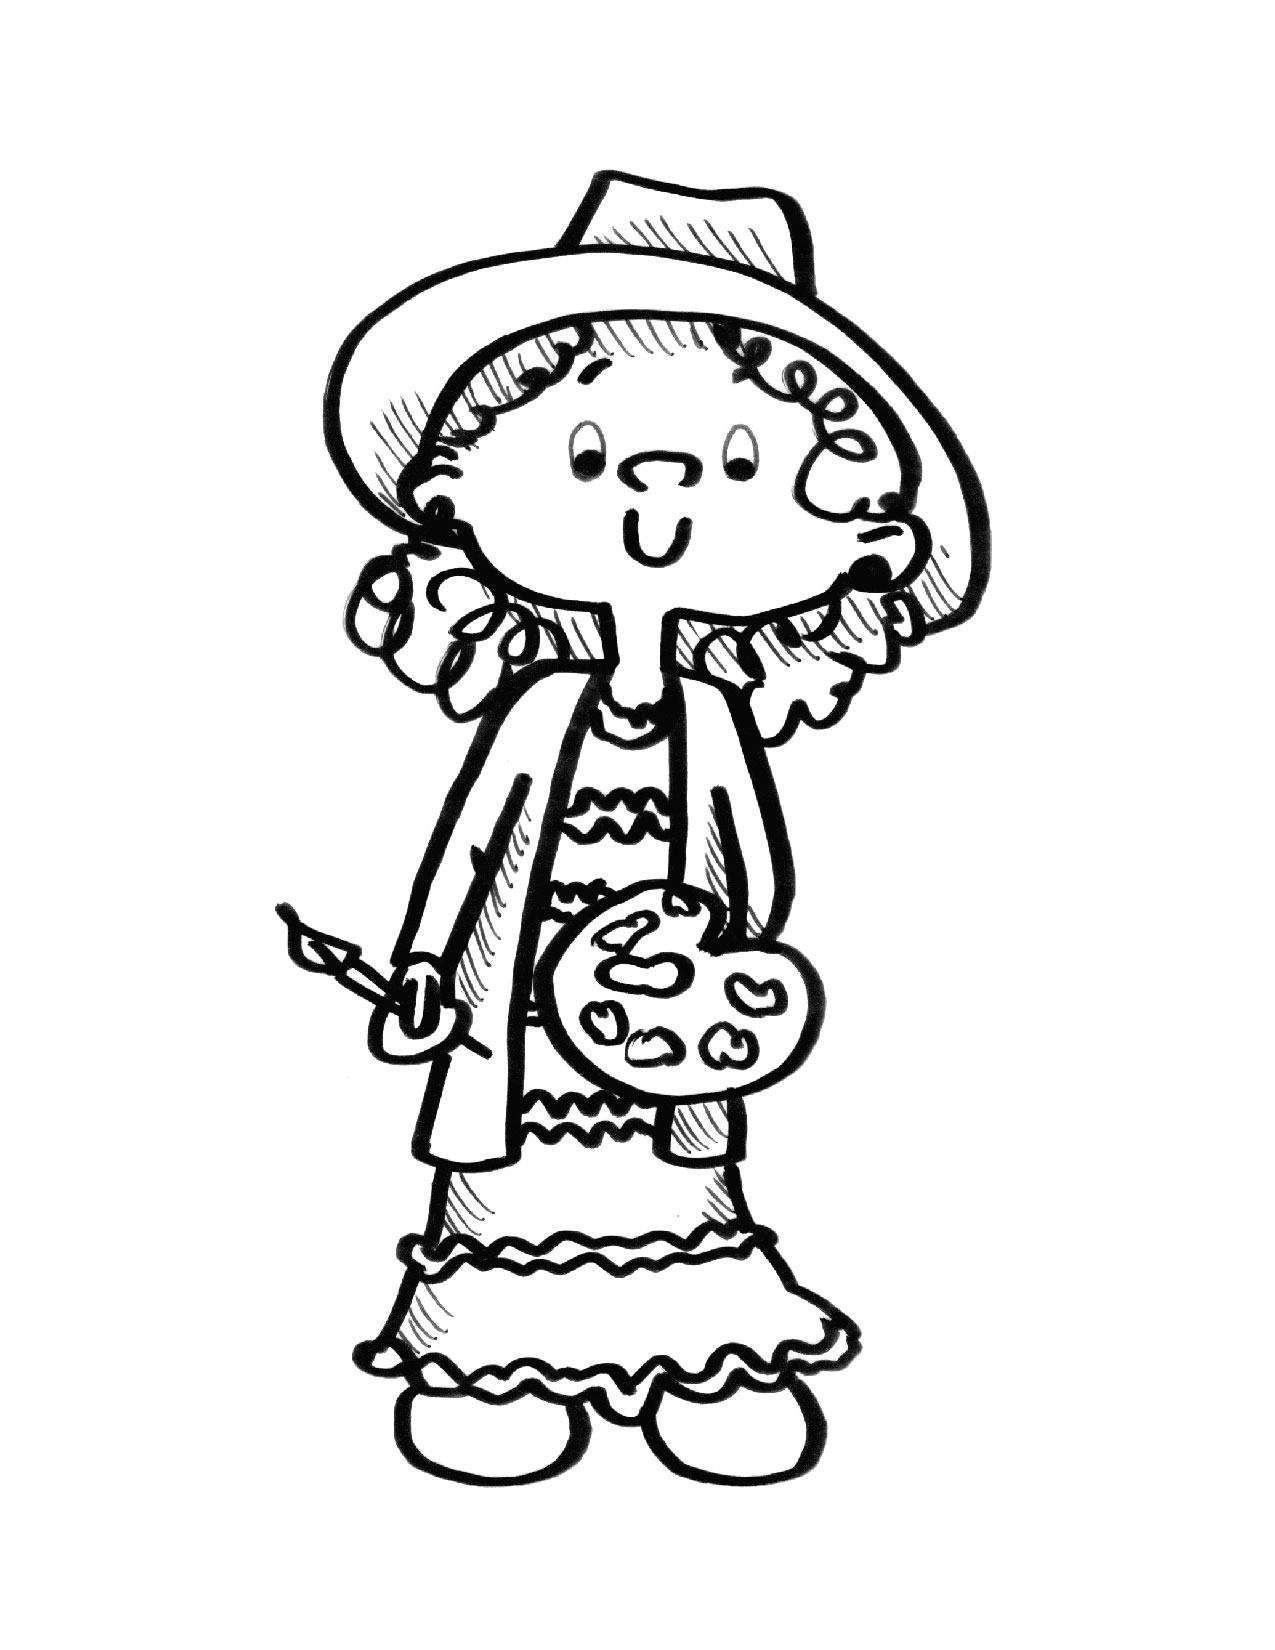 Coloring sheet of a little girl with painting supplies